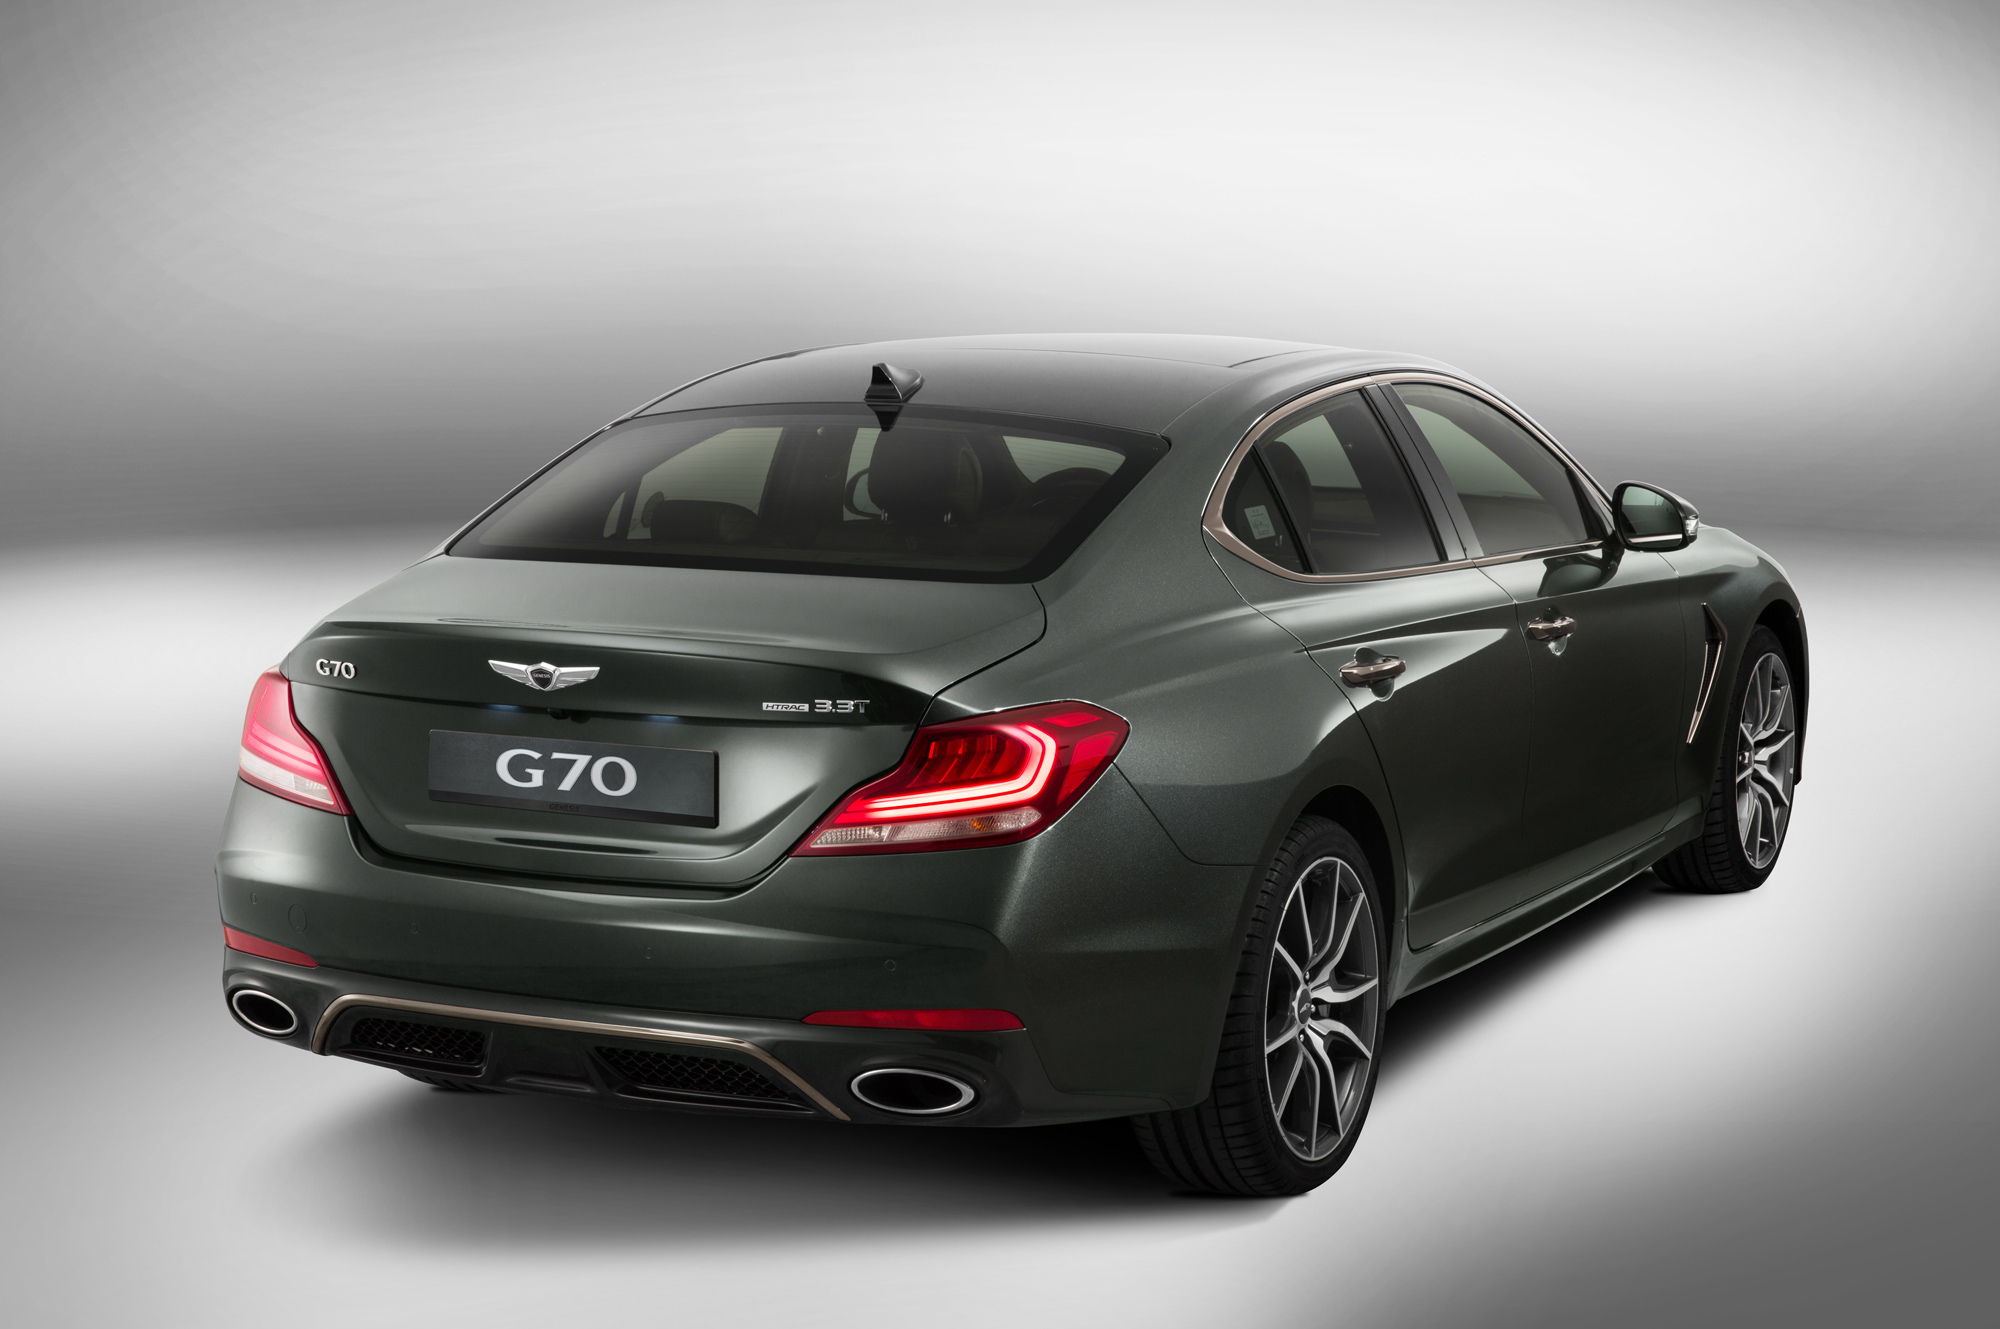 Genesis G70 Wallpapers Images Photos Pictures Backgrounds